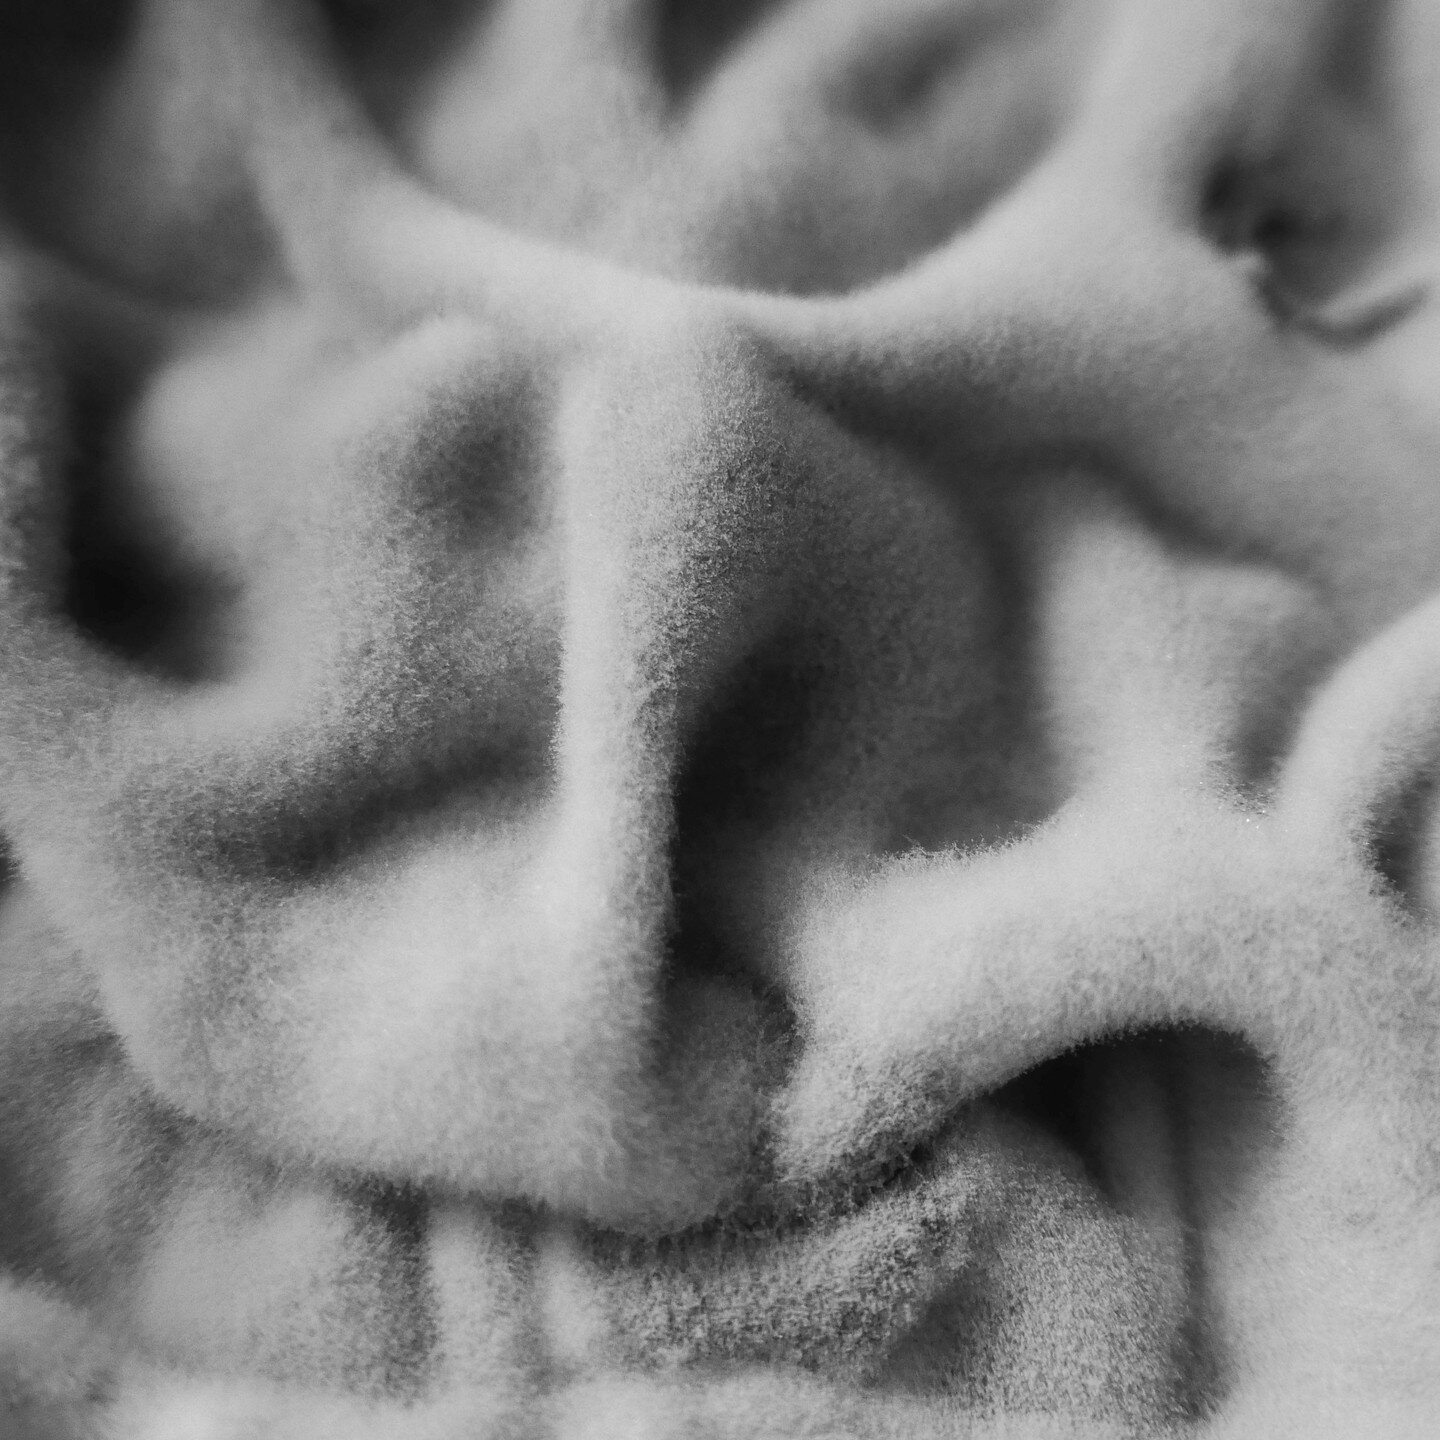 Cultured
#natureasart #weirdnature #magnificentinsignificants #mould #beanmould #opticalillusion #facesobsessed #pareidolia
#photographyyoucannotsee #photooftheday#bw #decay #bnw #bnwphotography #blackandwhite #blackandwhitephotography #monochrome #b